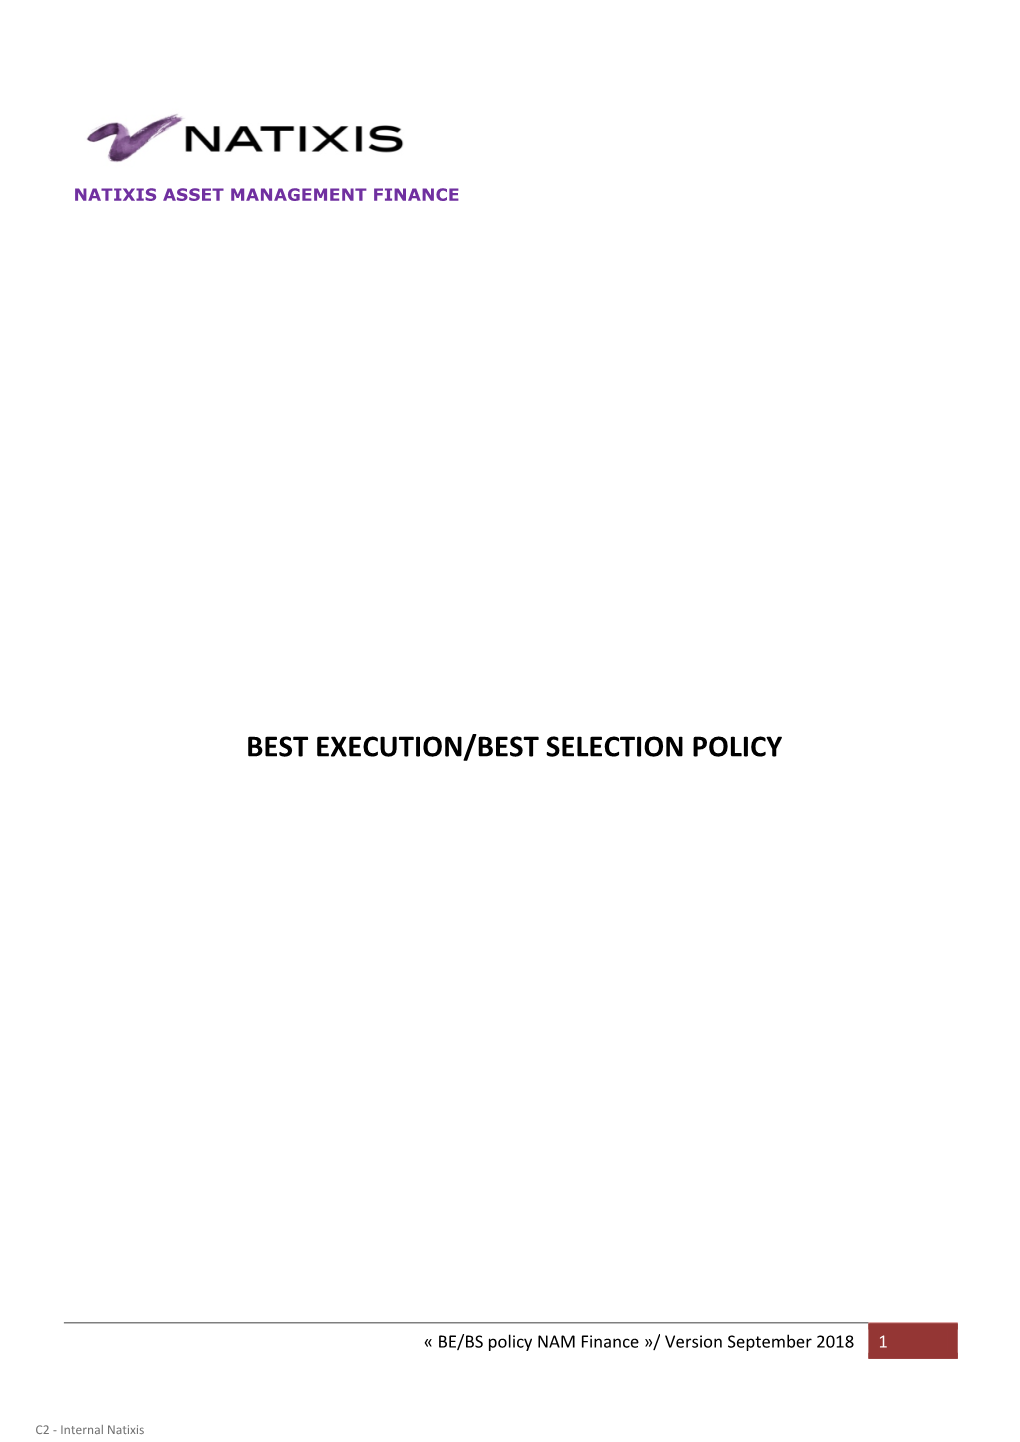 Best Execution/Best Selection Policy